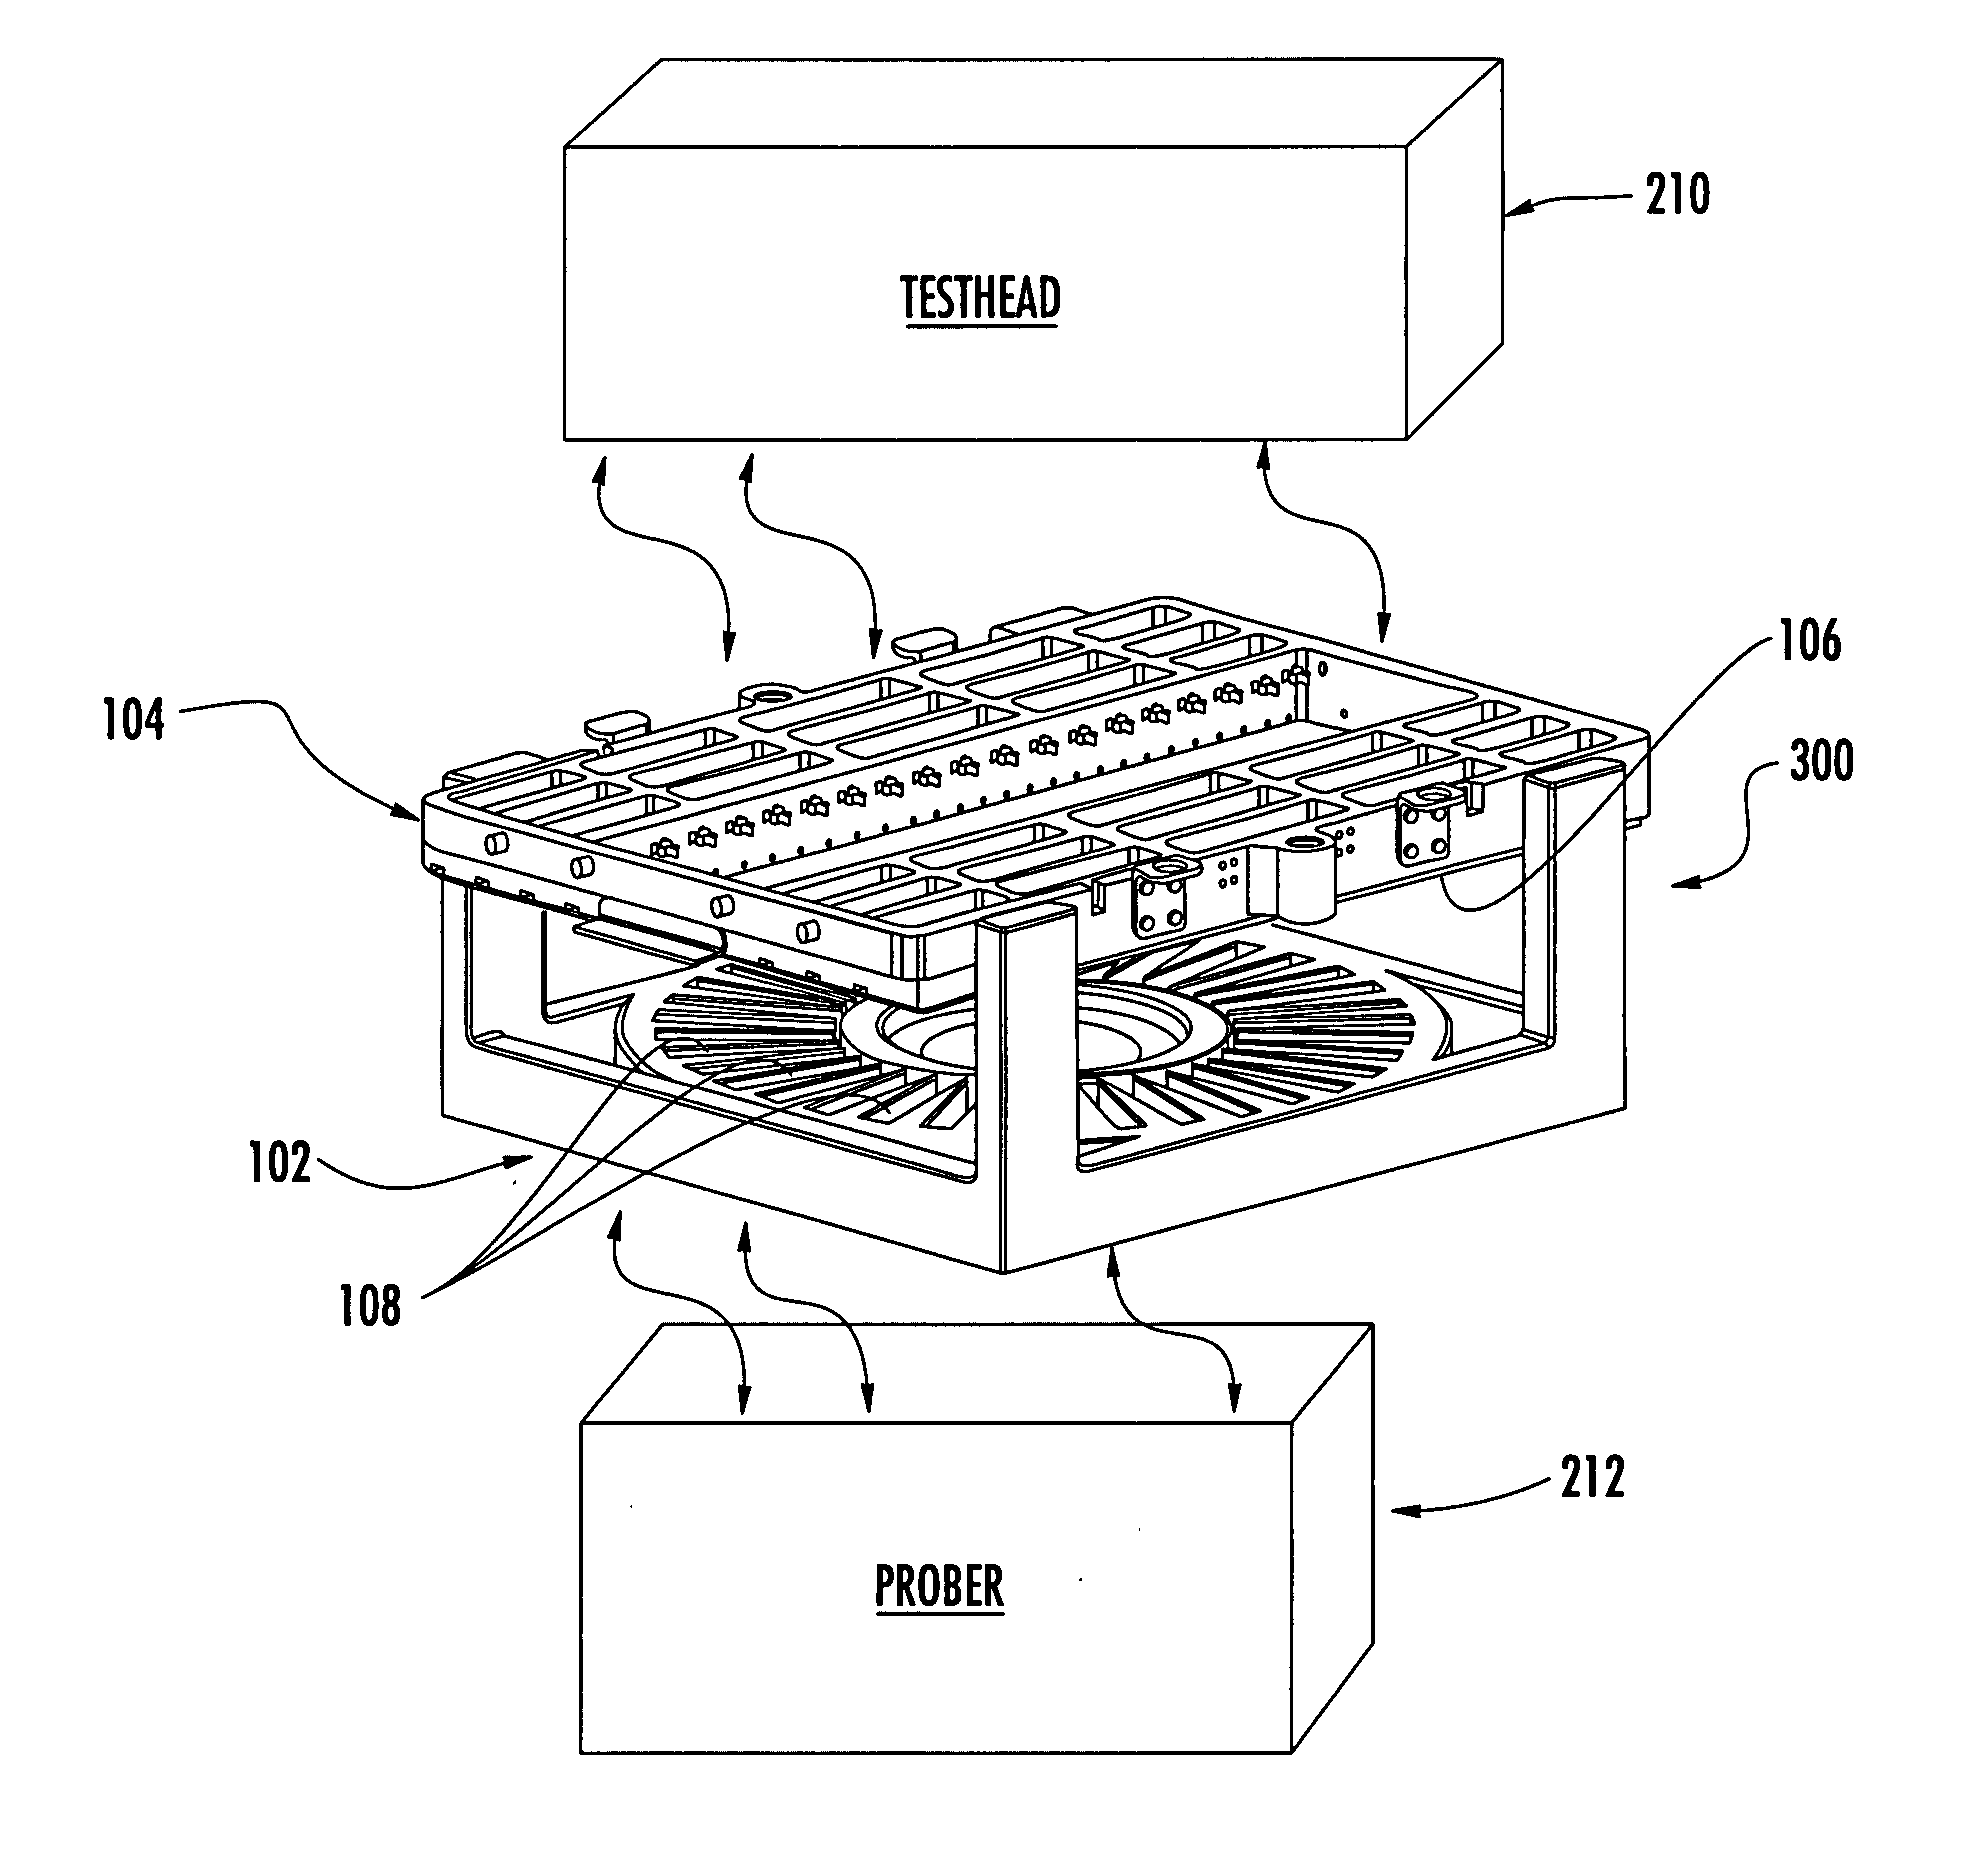 Automatic testing equipment instrument card and probe cabling system and apparatus